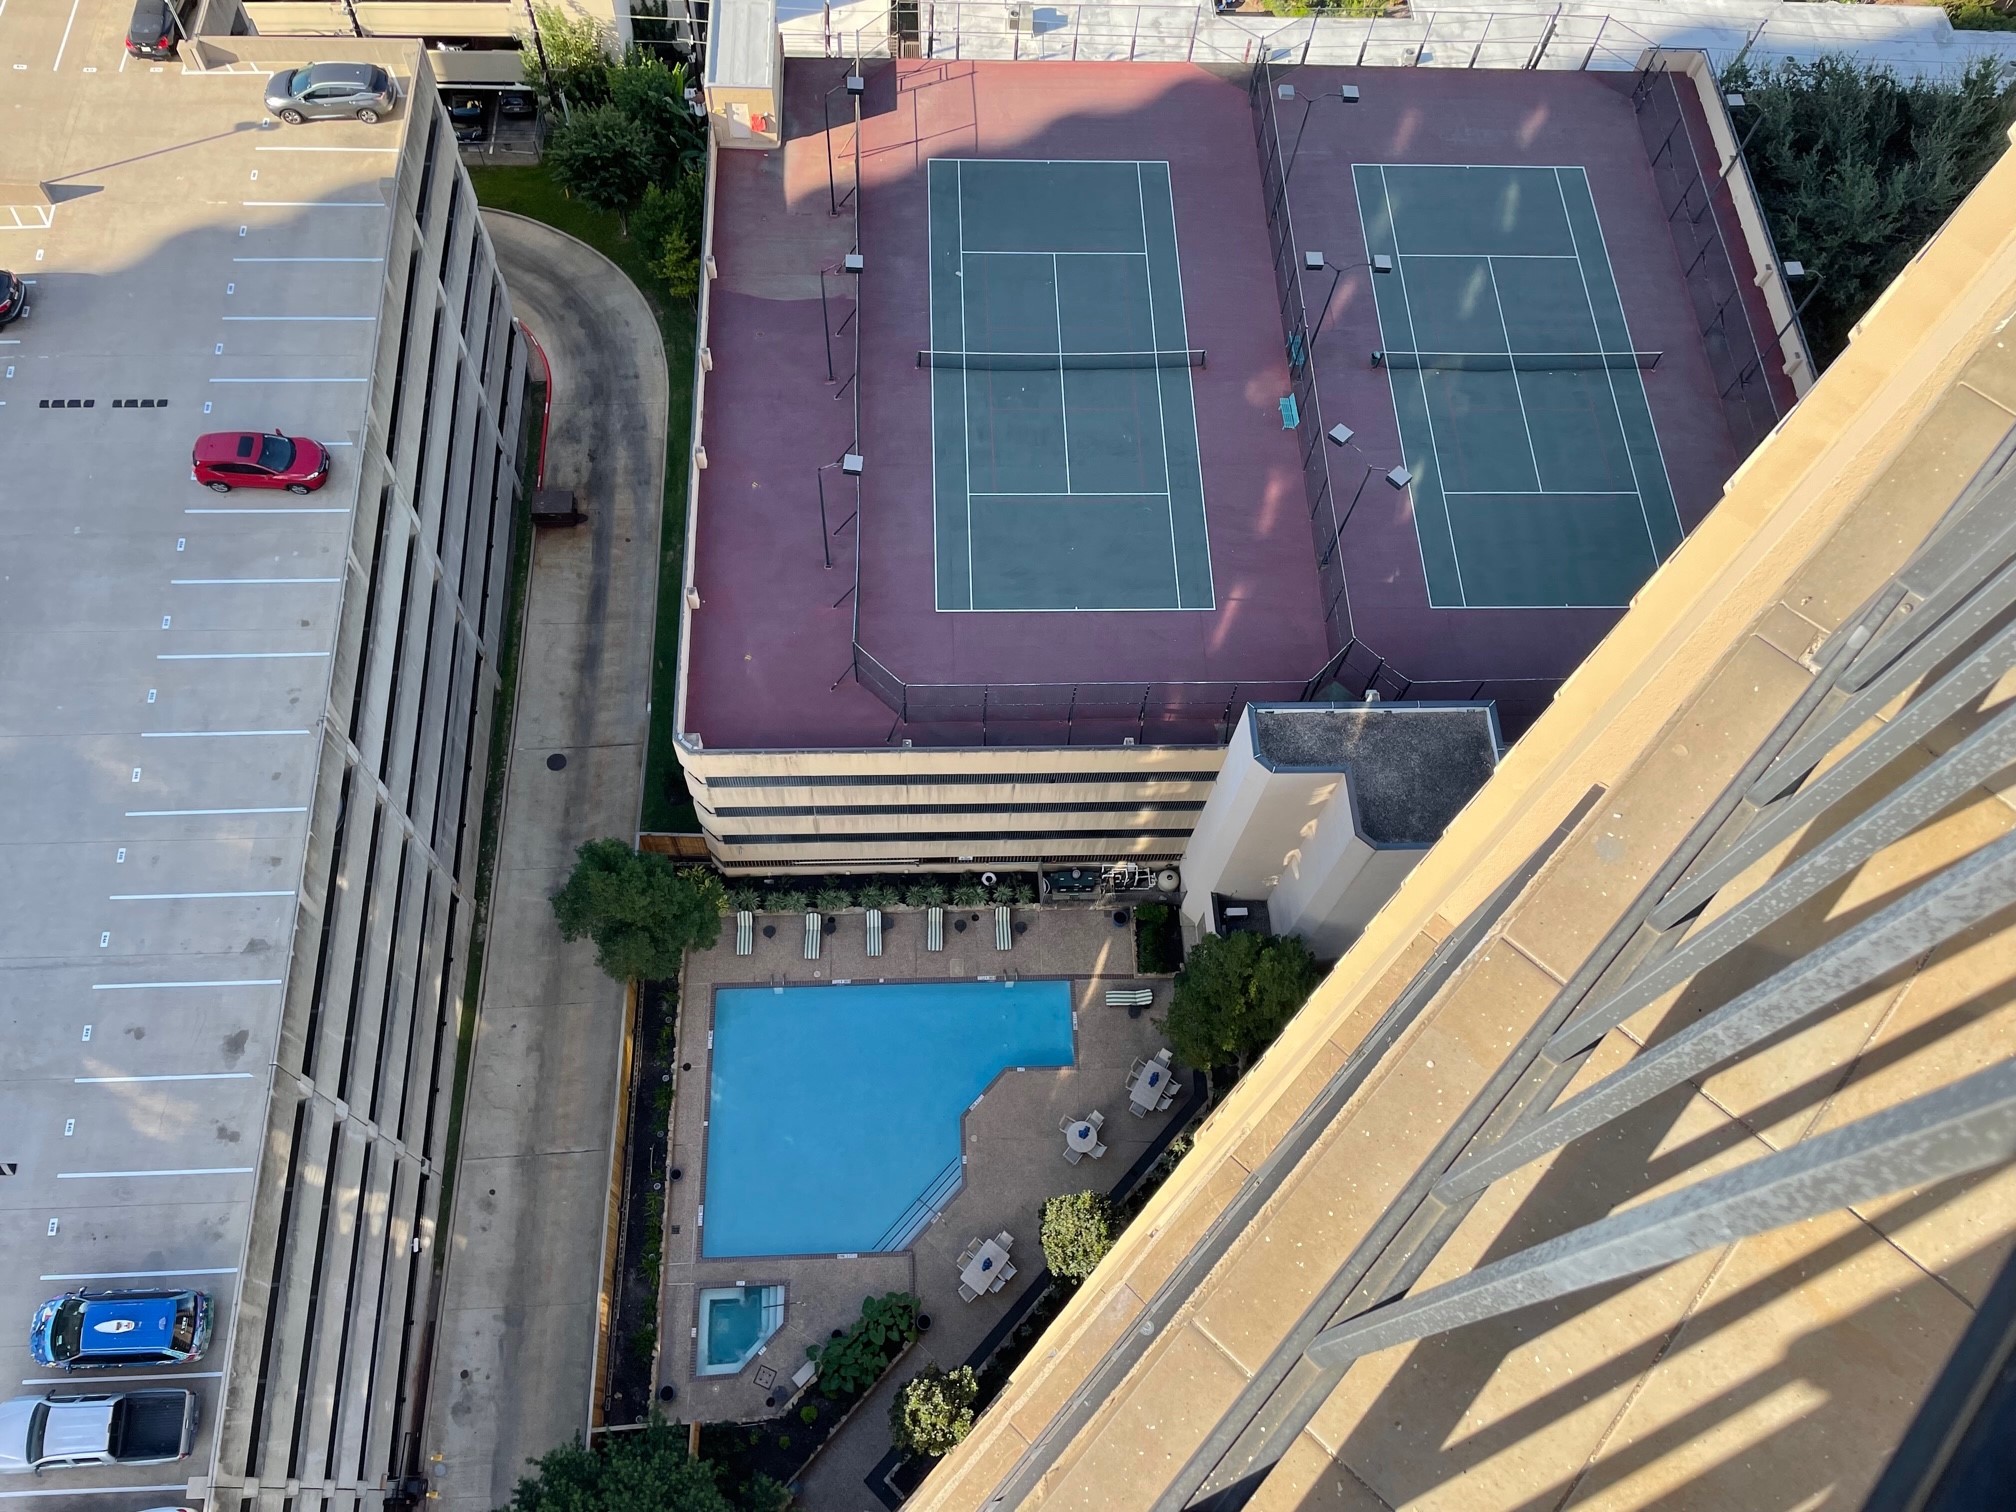 Pool, hot tub, 2 tennis courts on the roof of garage from the 21st floor